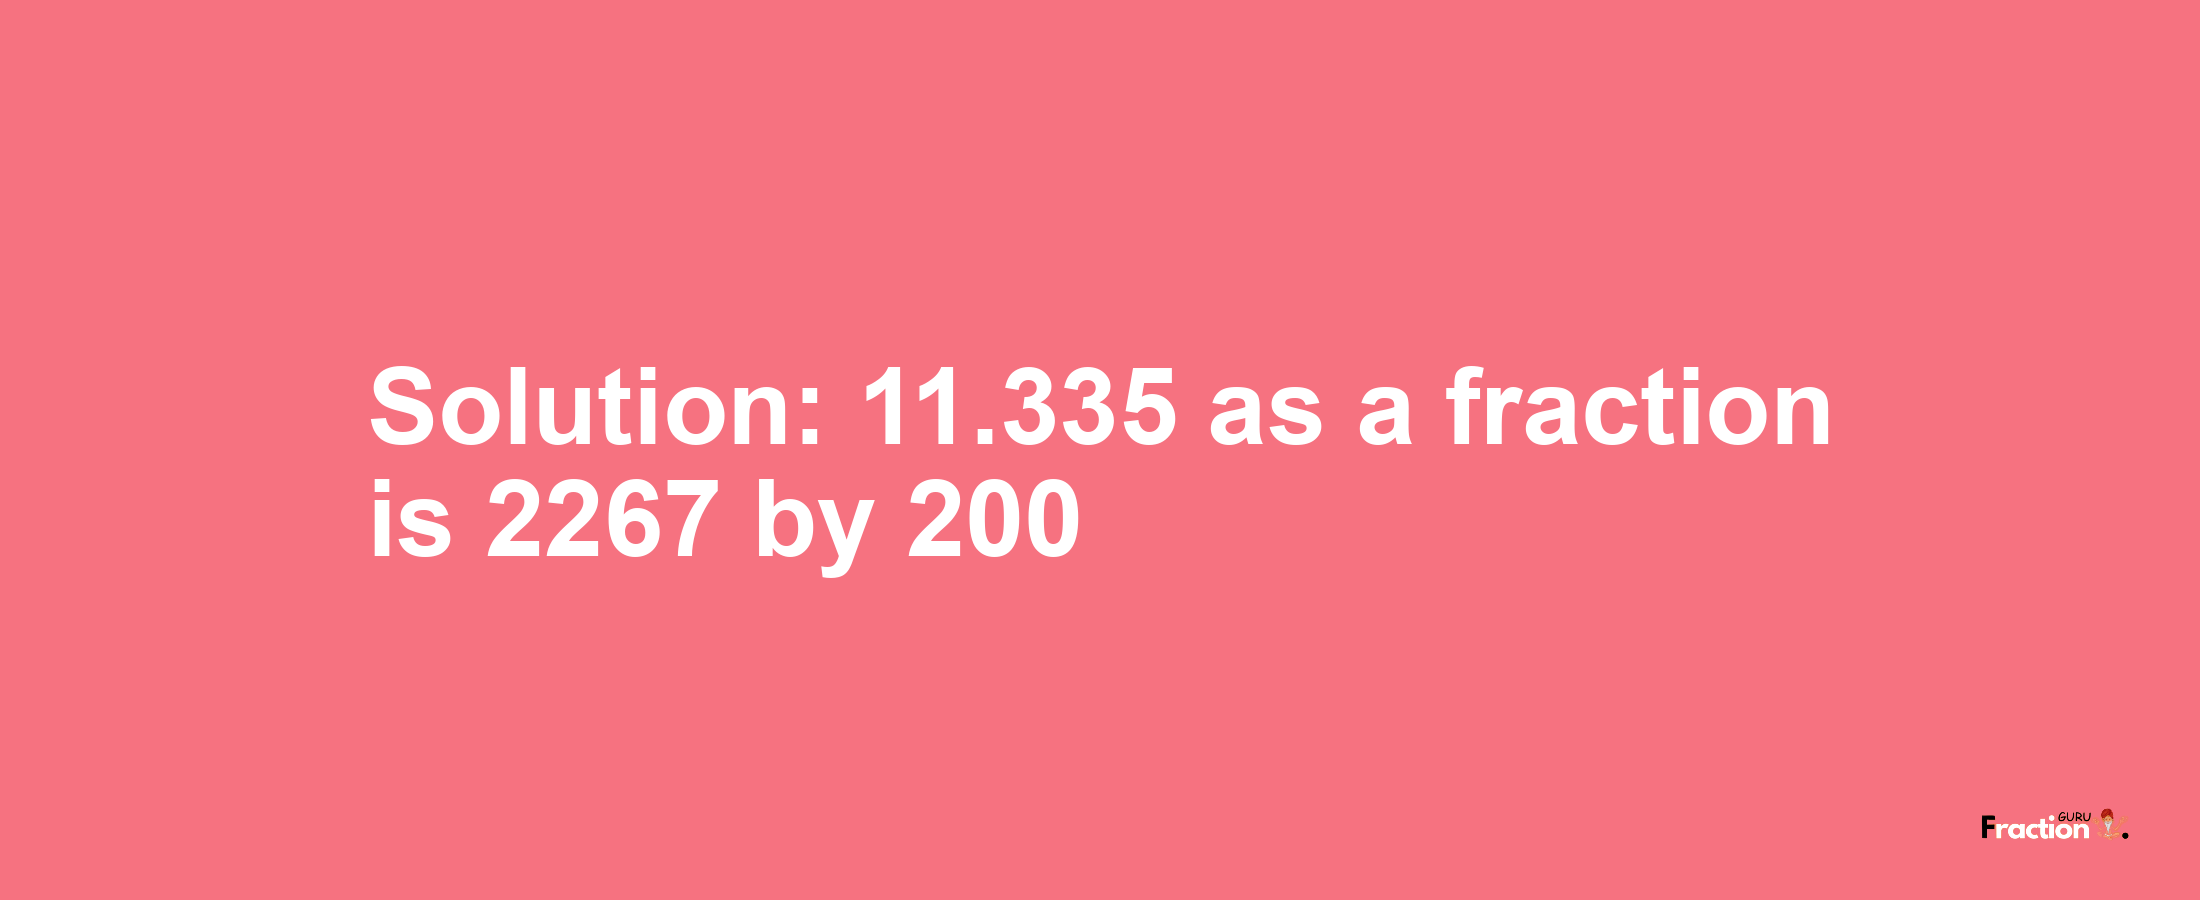 Solution:11.335 as a fraction is 2267/200